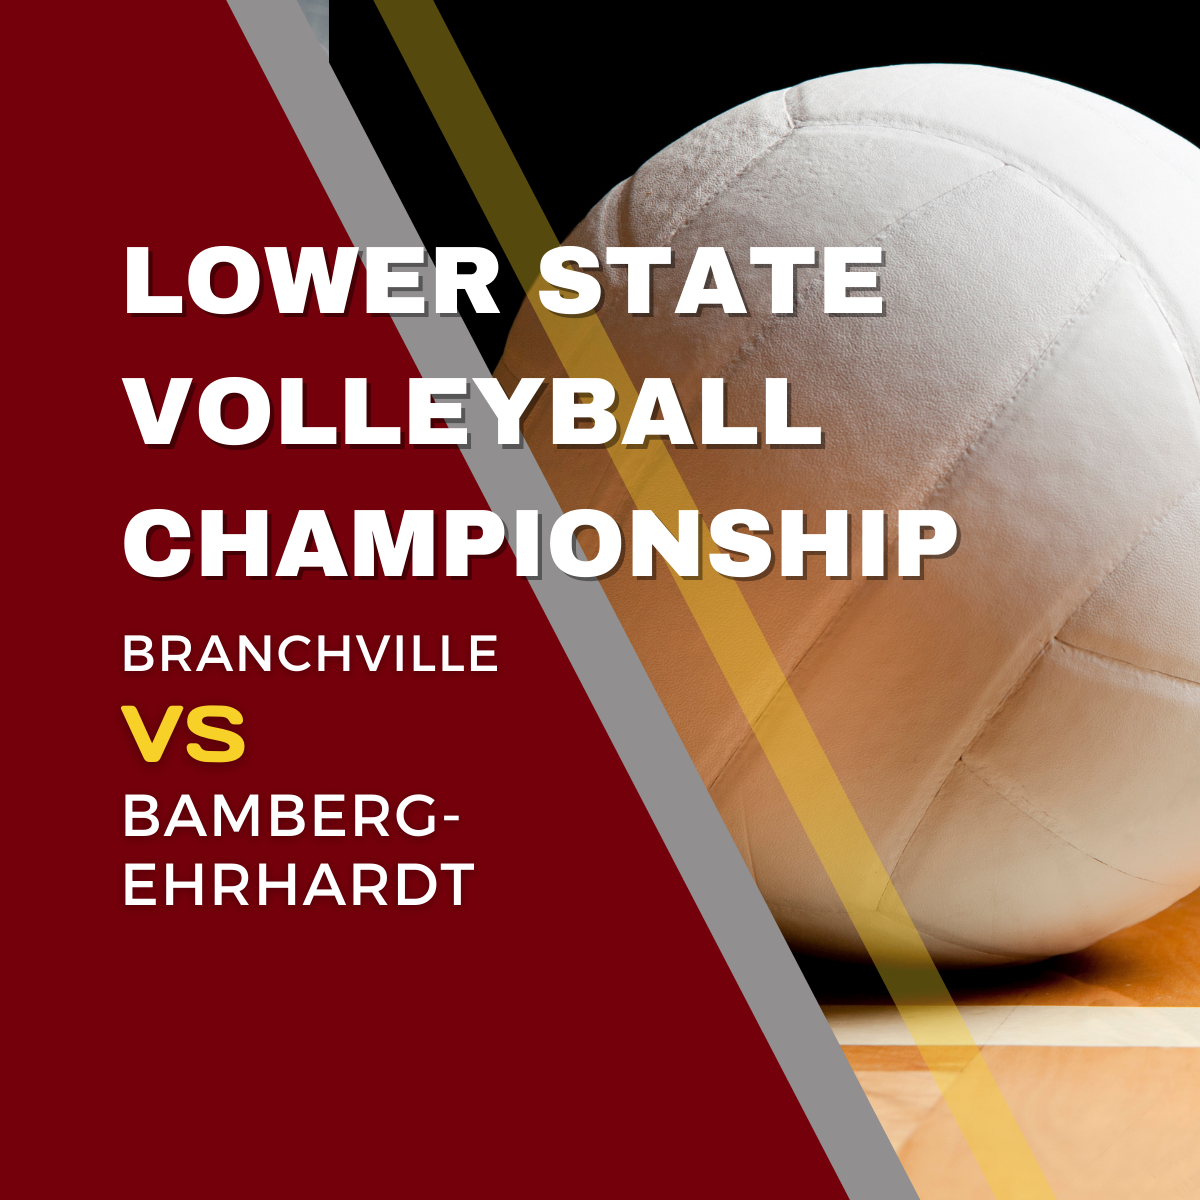 Lower State Volleyball Championship